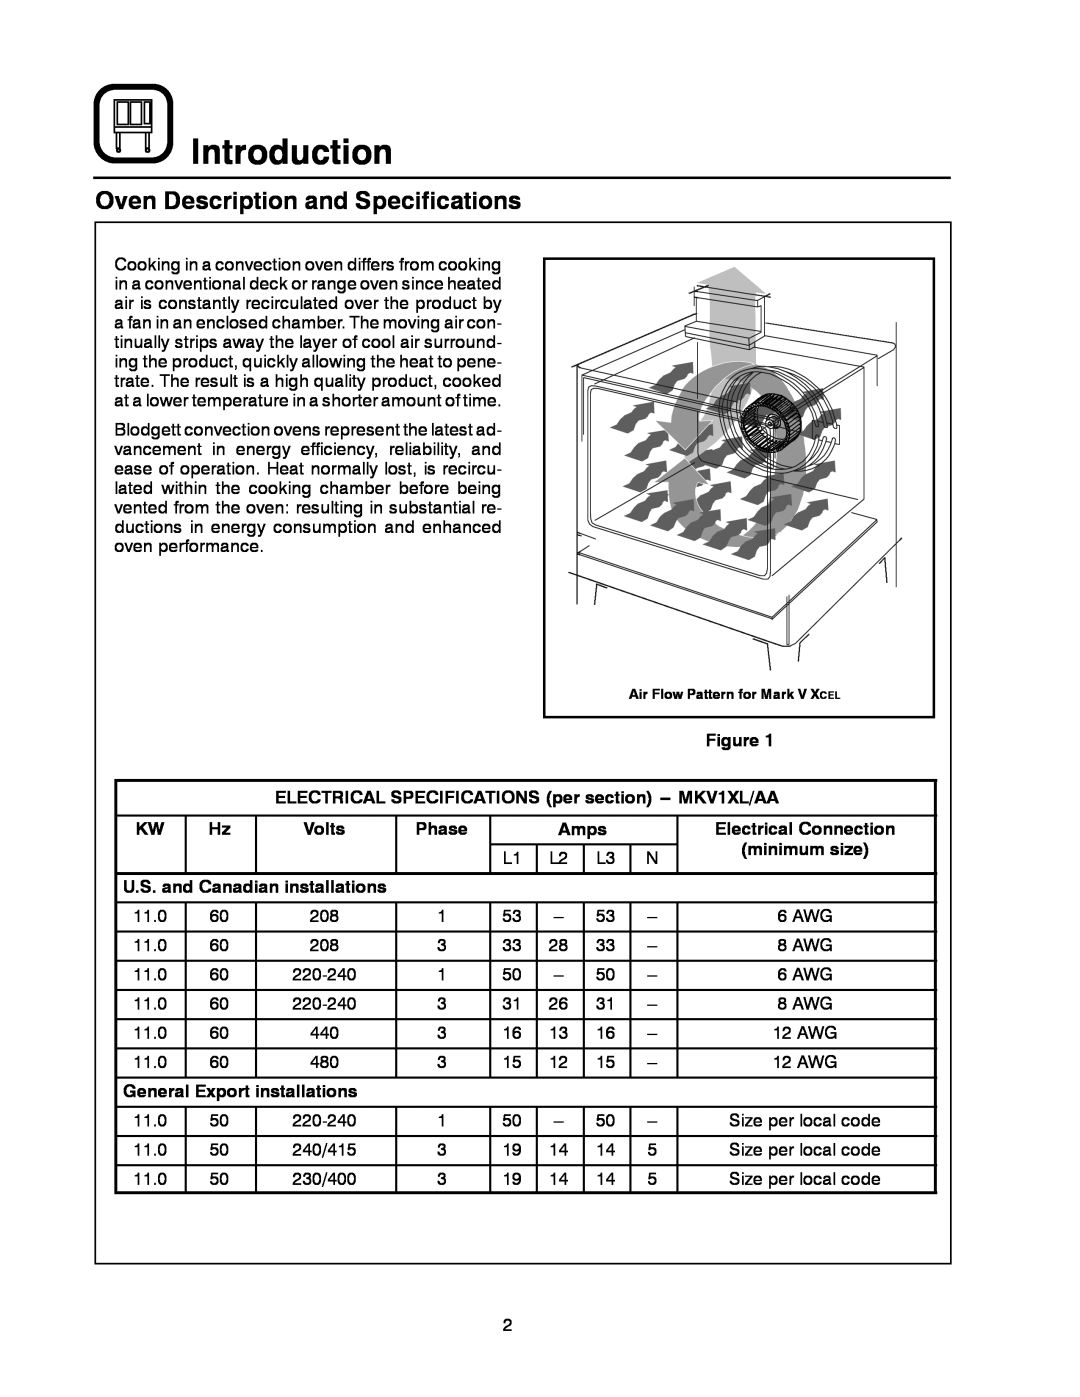 Blodgett MARK V XCEL CONVECTION OVEN Introduction, ELECTRICAL SPECIFICATIONS per section -- MKV1XL/AA, Volts, Phase, Amps 